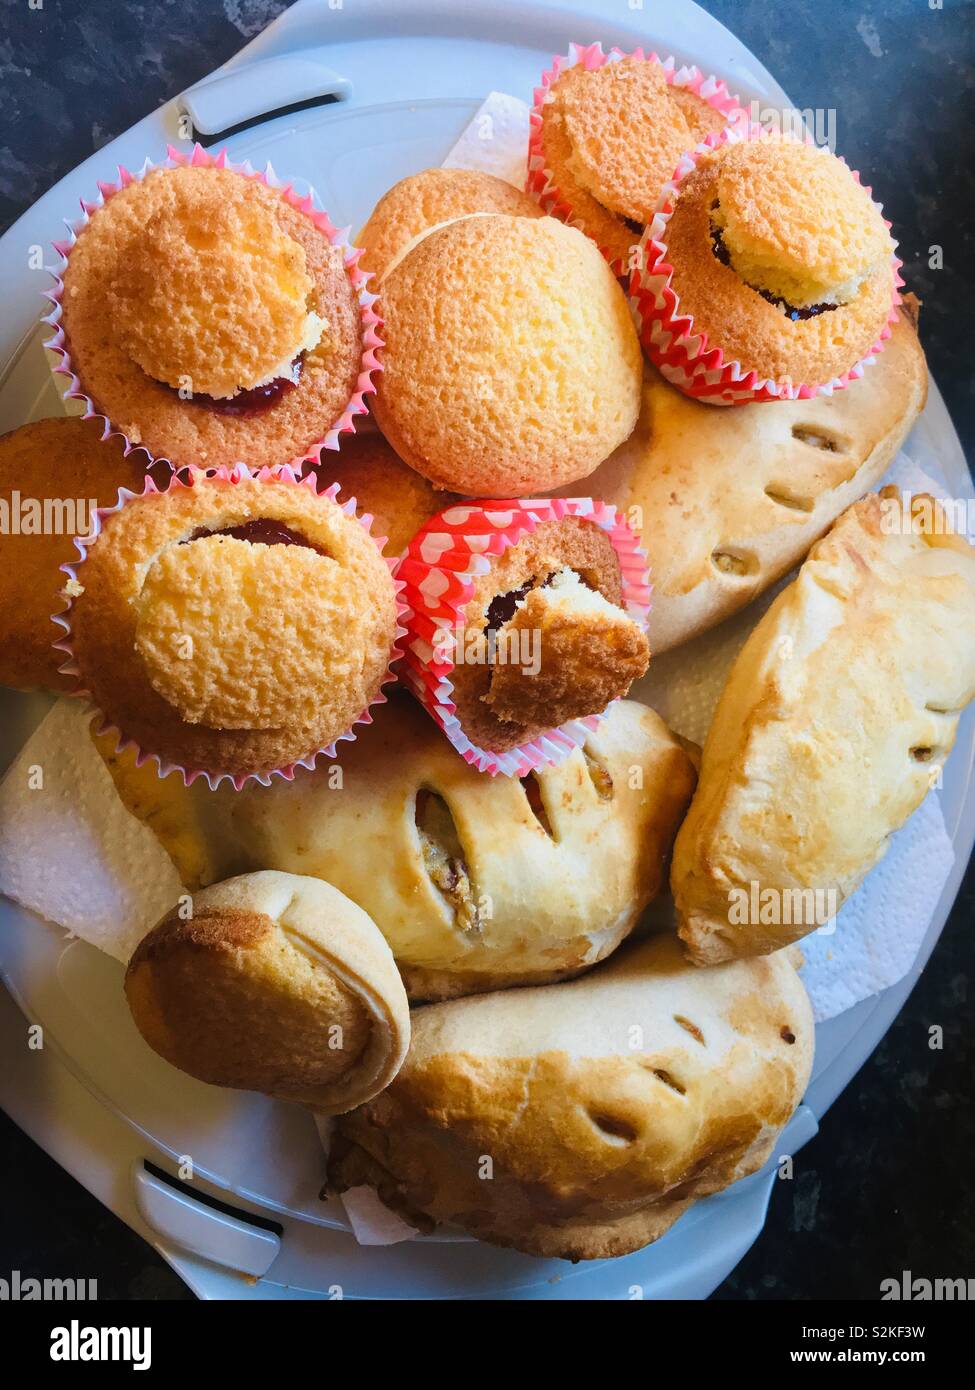 Home Baking - pasty and cake selection for a buffet Stock Photo